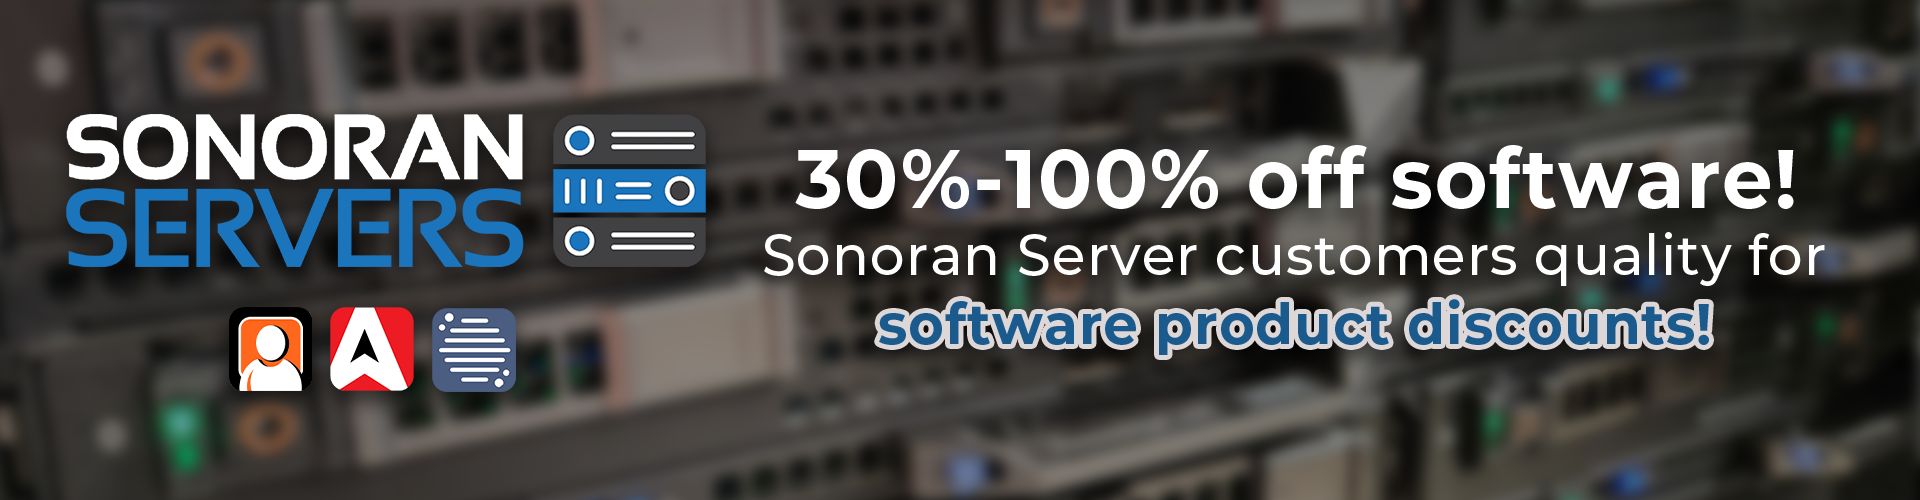 Save 30-100% off Sonoran Software Products with a Sonoran Servers Subscription!